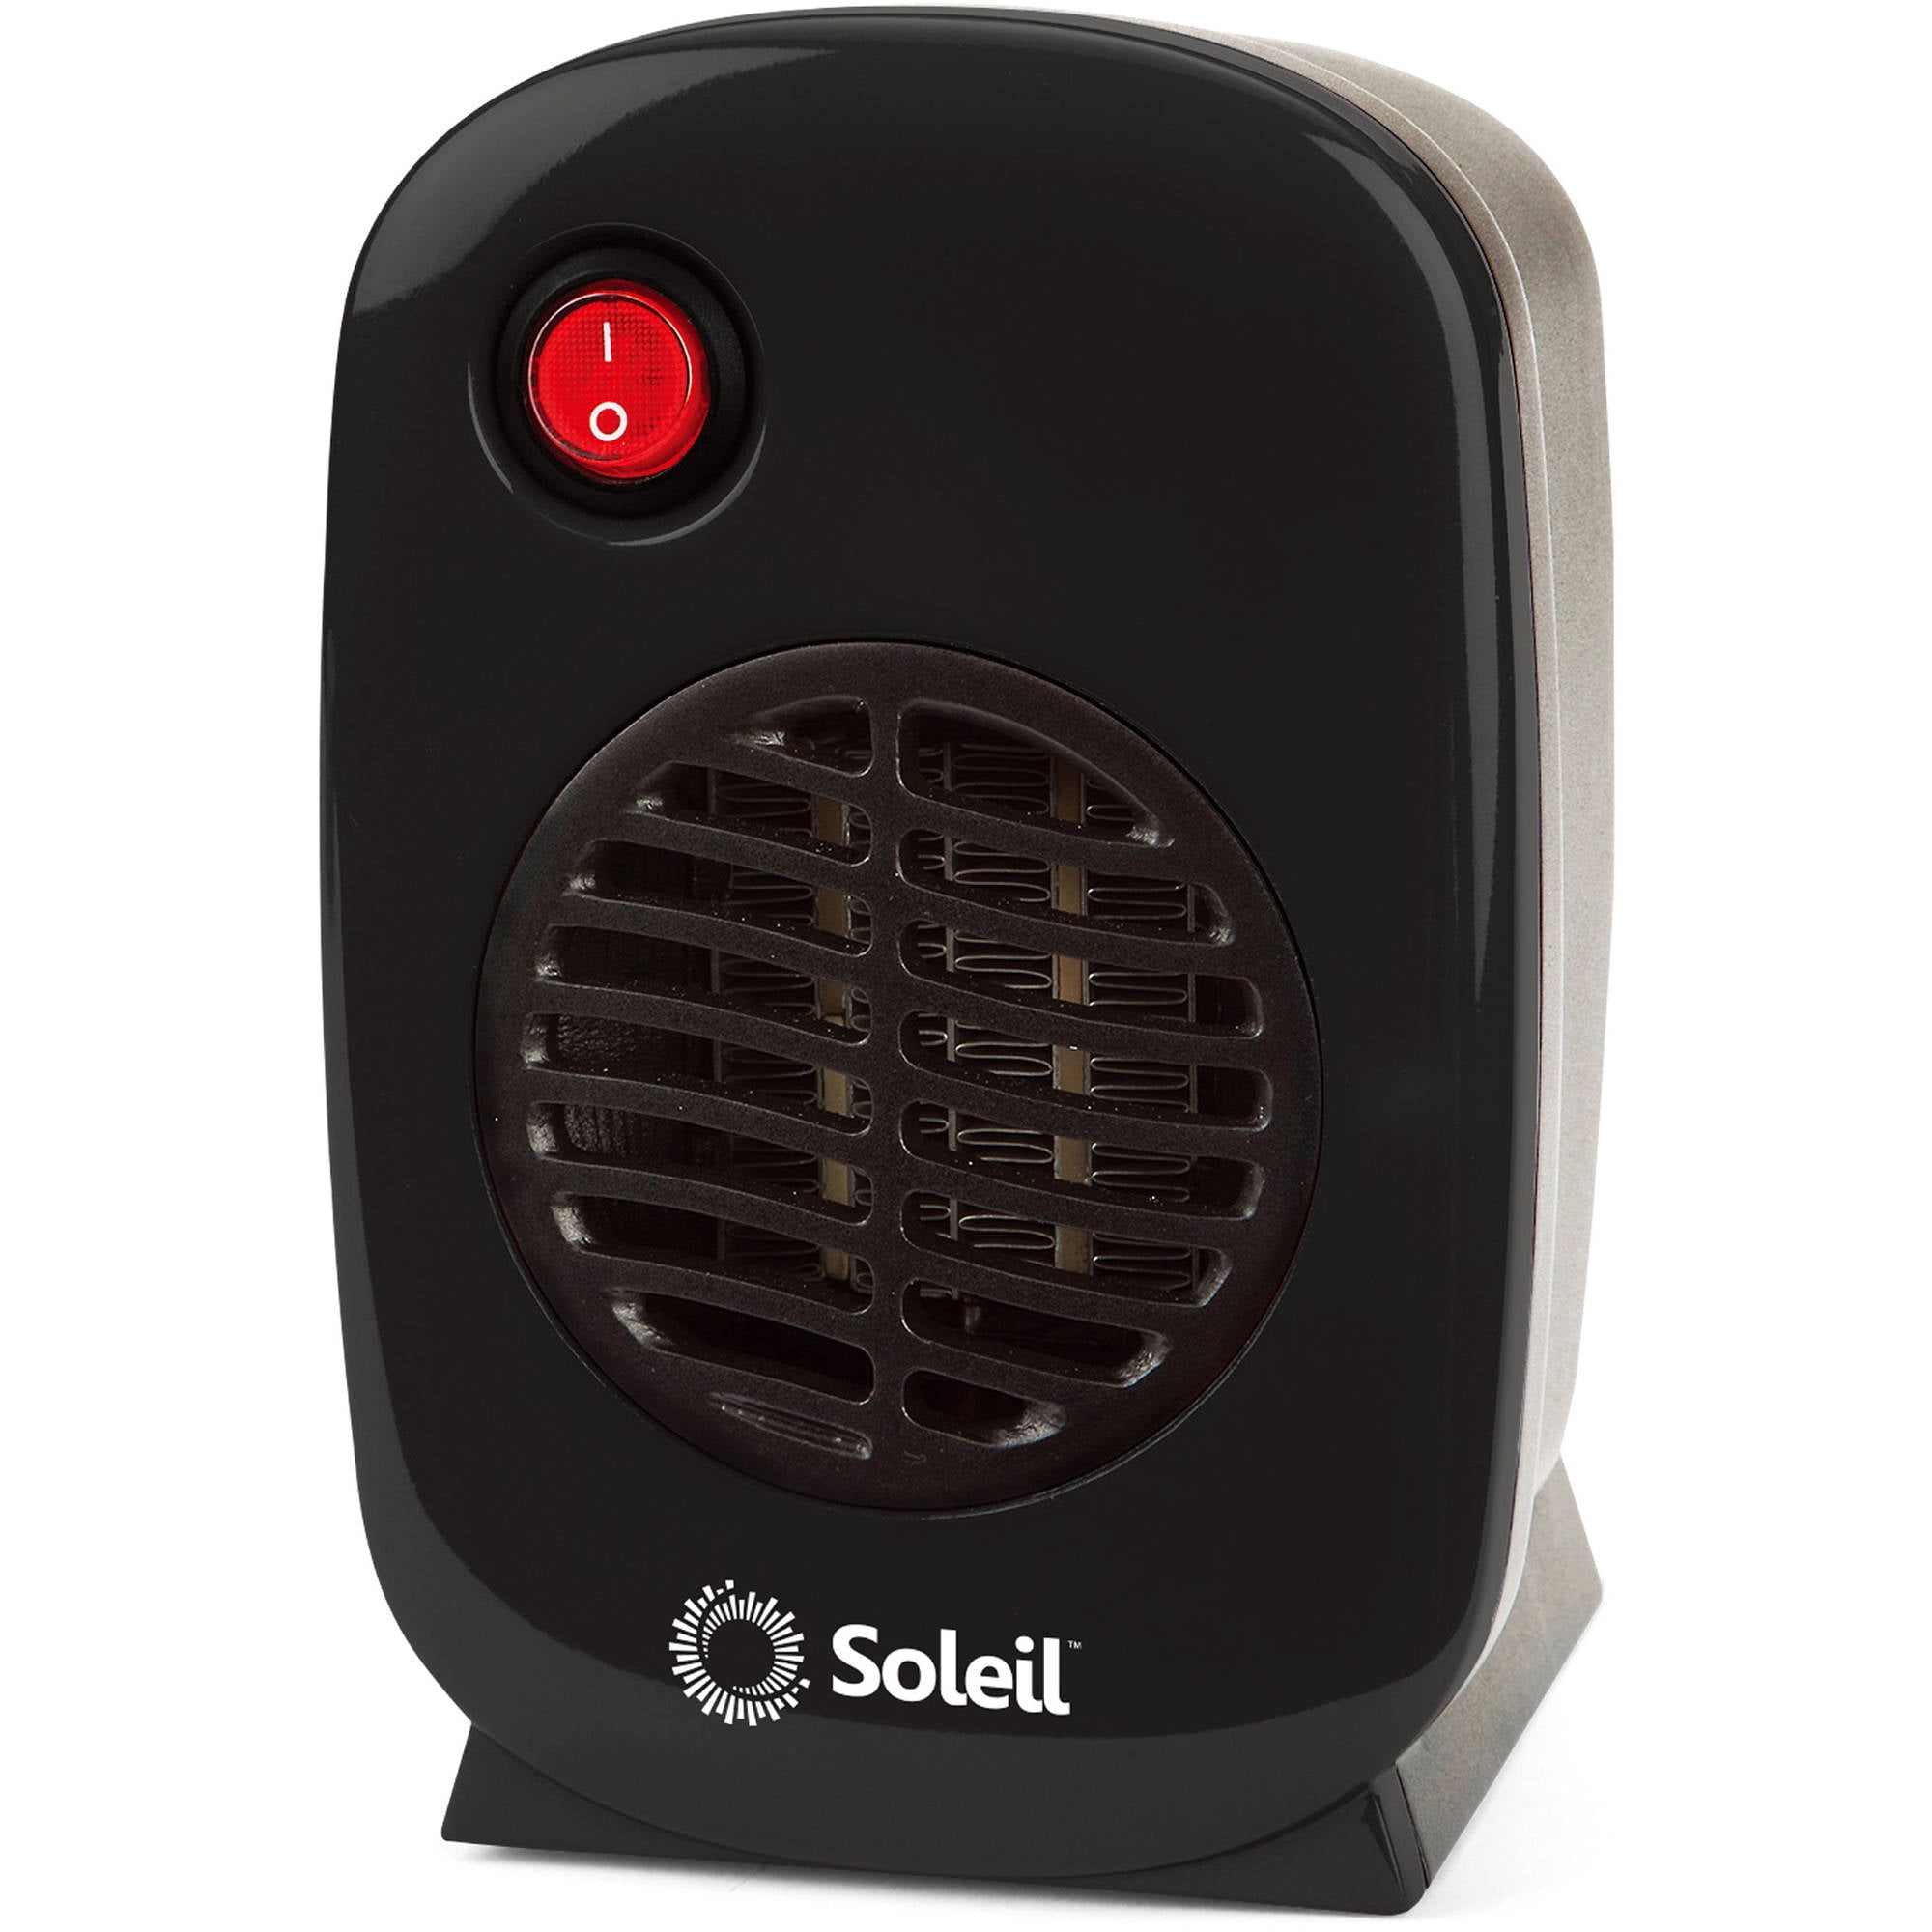 Soleil Ceramic Personal Handy Heater Thermostat Small Portable Wall Outlet BLACK 